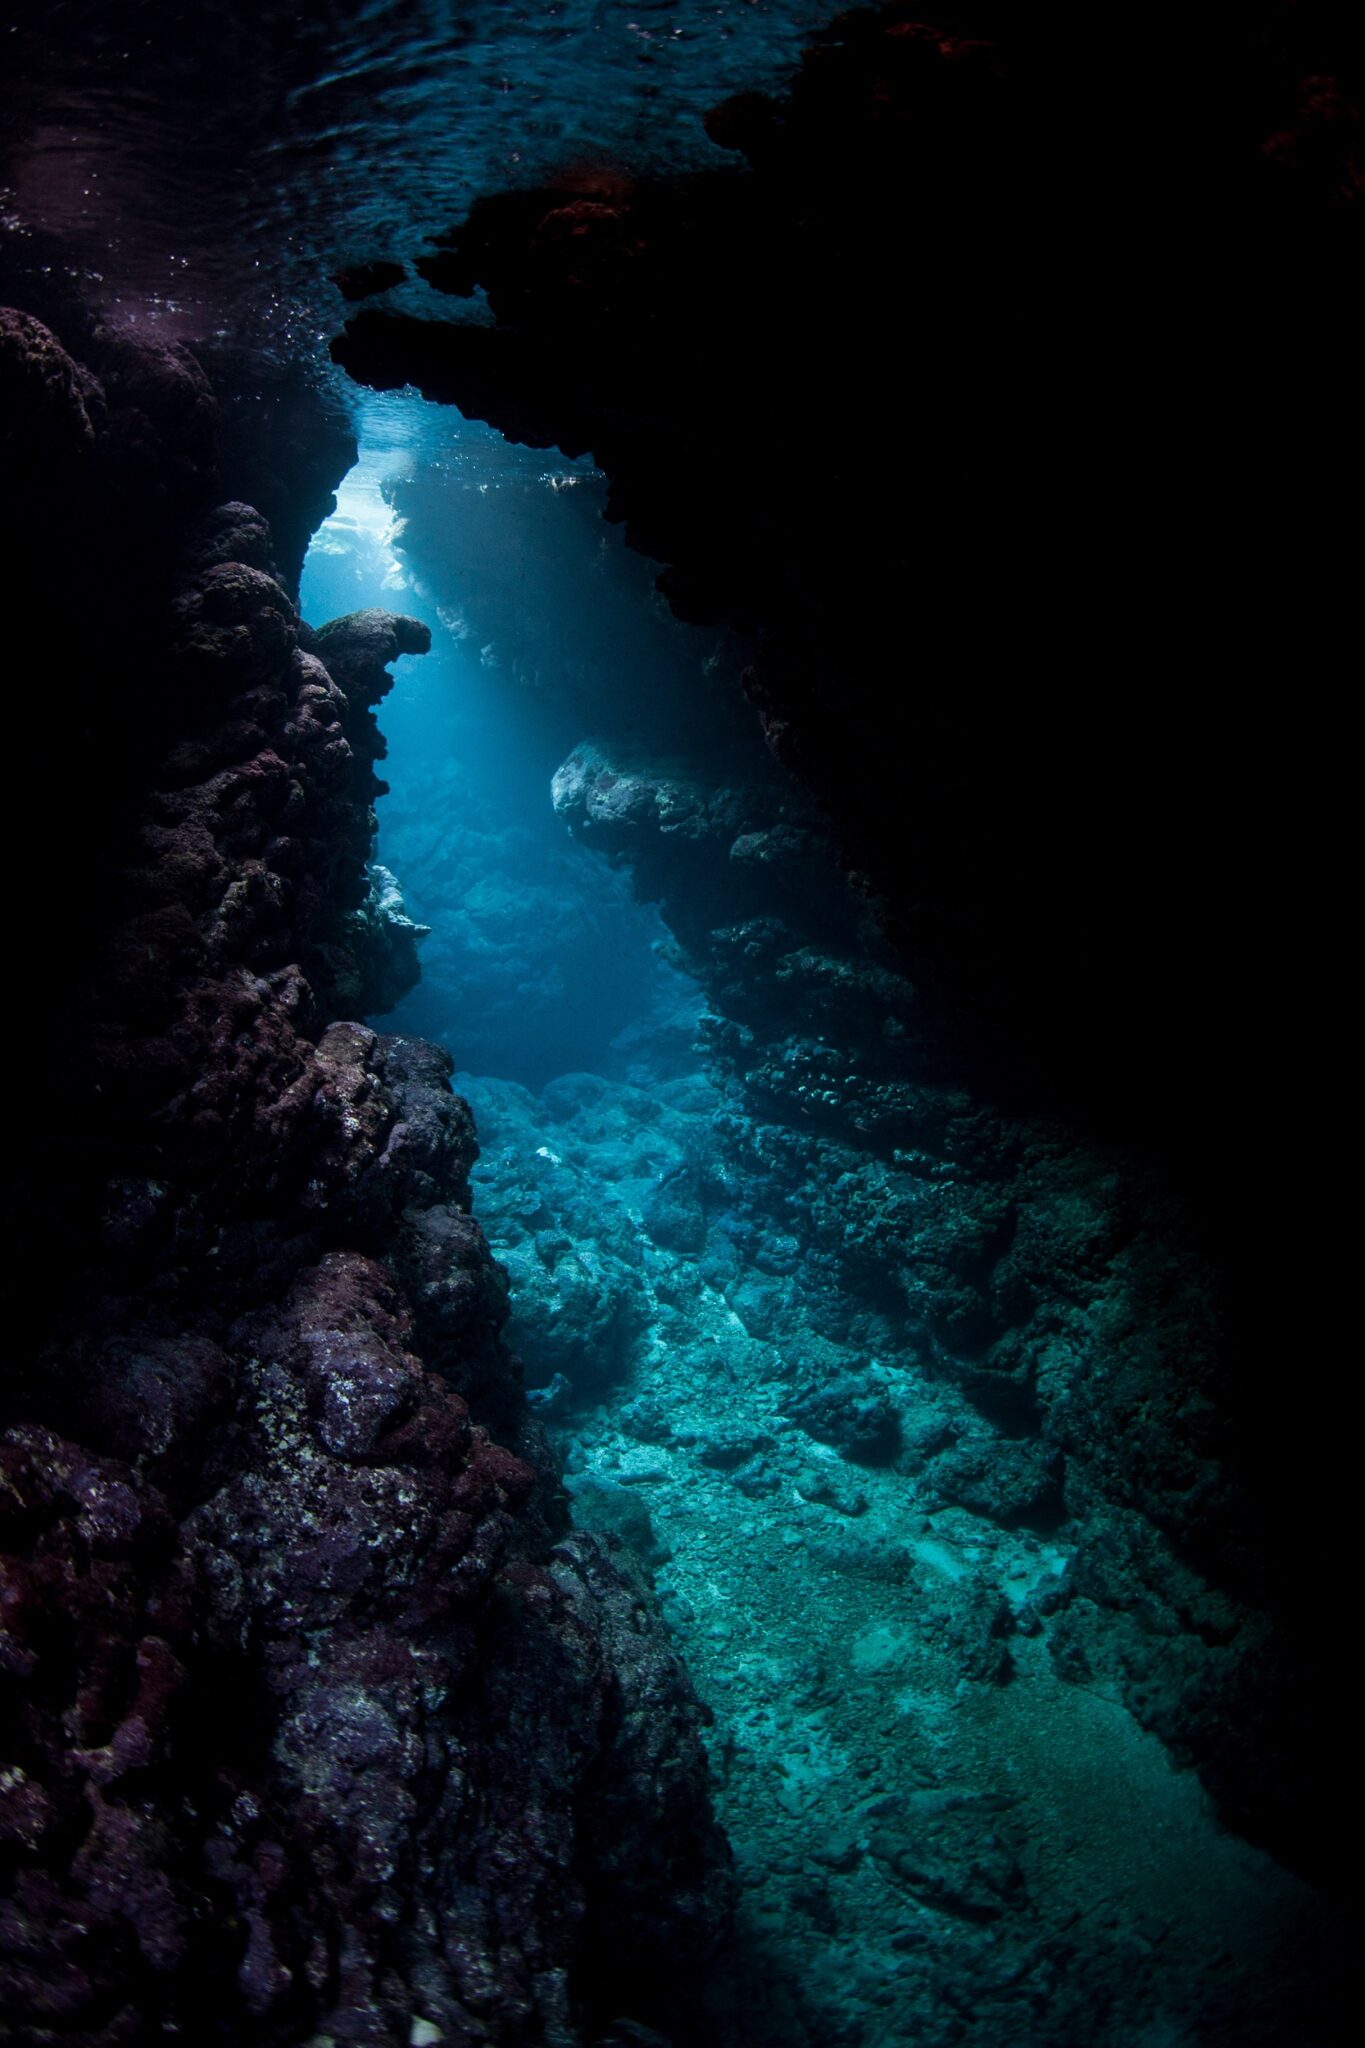 a beam of light shines into an underwater cavern